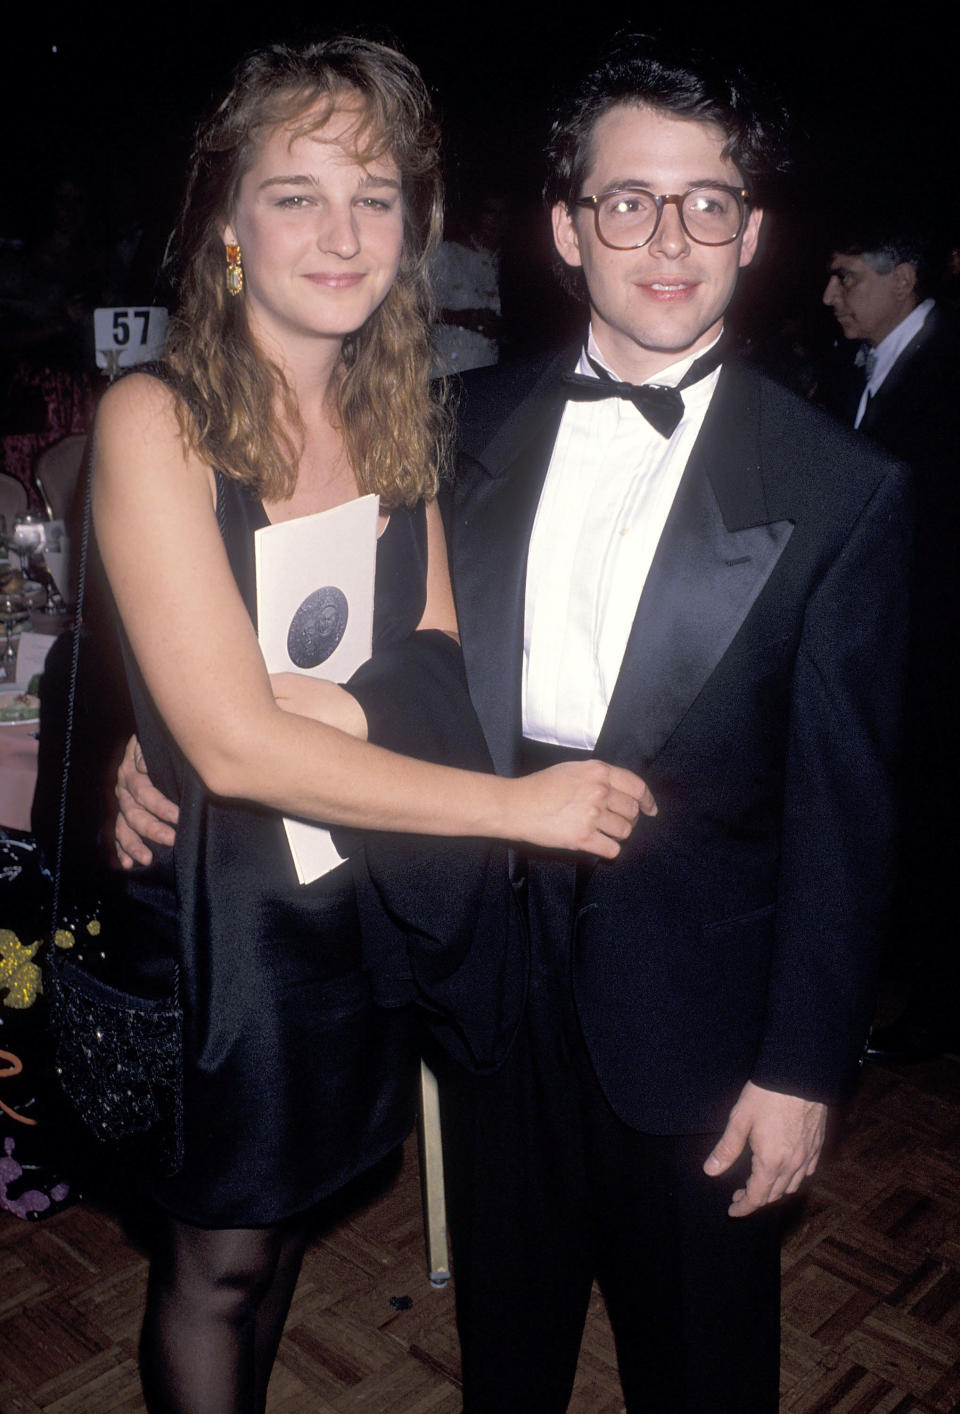 Helen Hunt and Matthew Broderick gave love a shot in 1987 and although happily every after wasn't in the cards for the pair, the couple did forge a lifelong friendship. Hunt and Broderick are even comfortable enough with their relationship that <a href="http://articles.nydailynews.com/2008-04-23/gossip/17895768_1_cinema-society-outfit-onstage">they filmed a sex scene together for 2008's "Then She Found Me."</a>